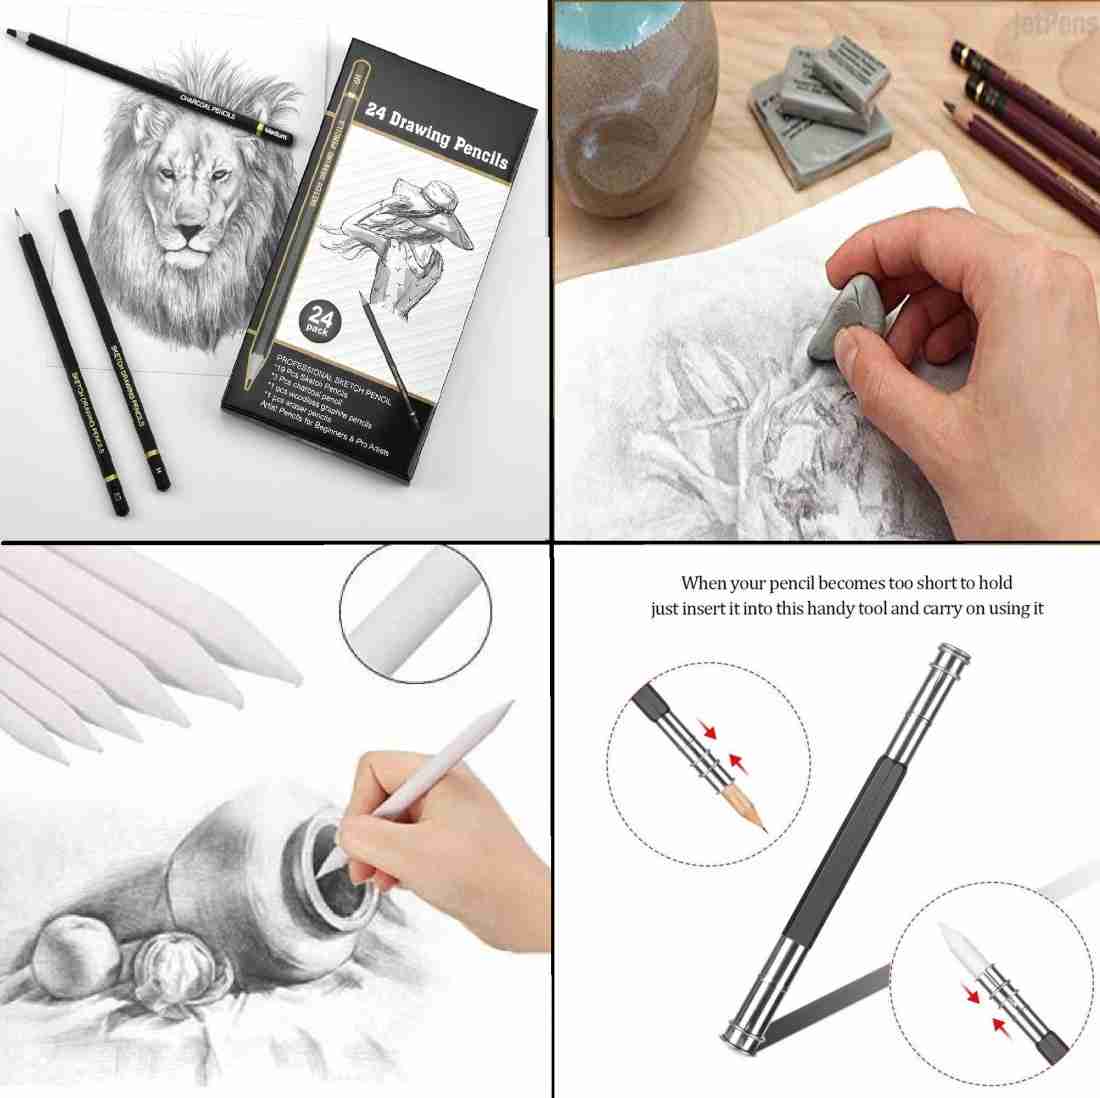 Top 15 Online Tools for Drawing and Sketching